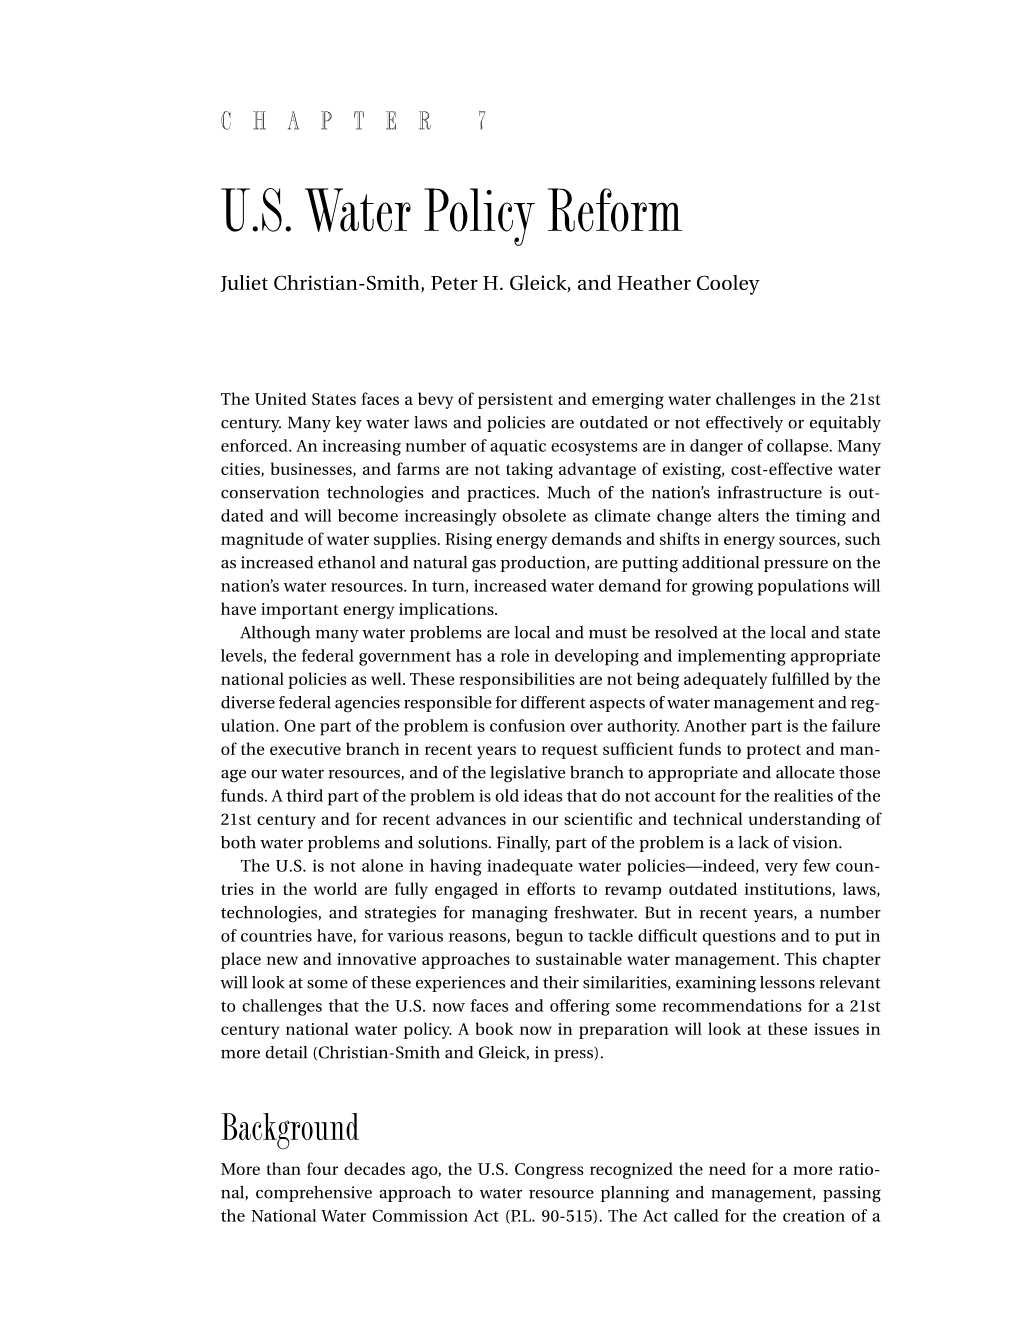 U.S. Water Policy Reform